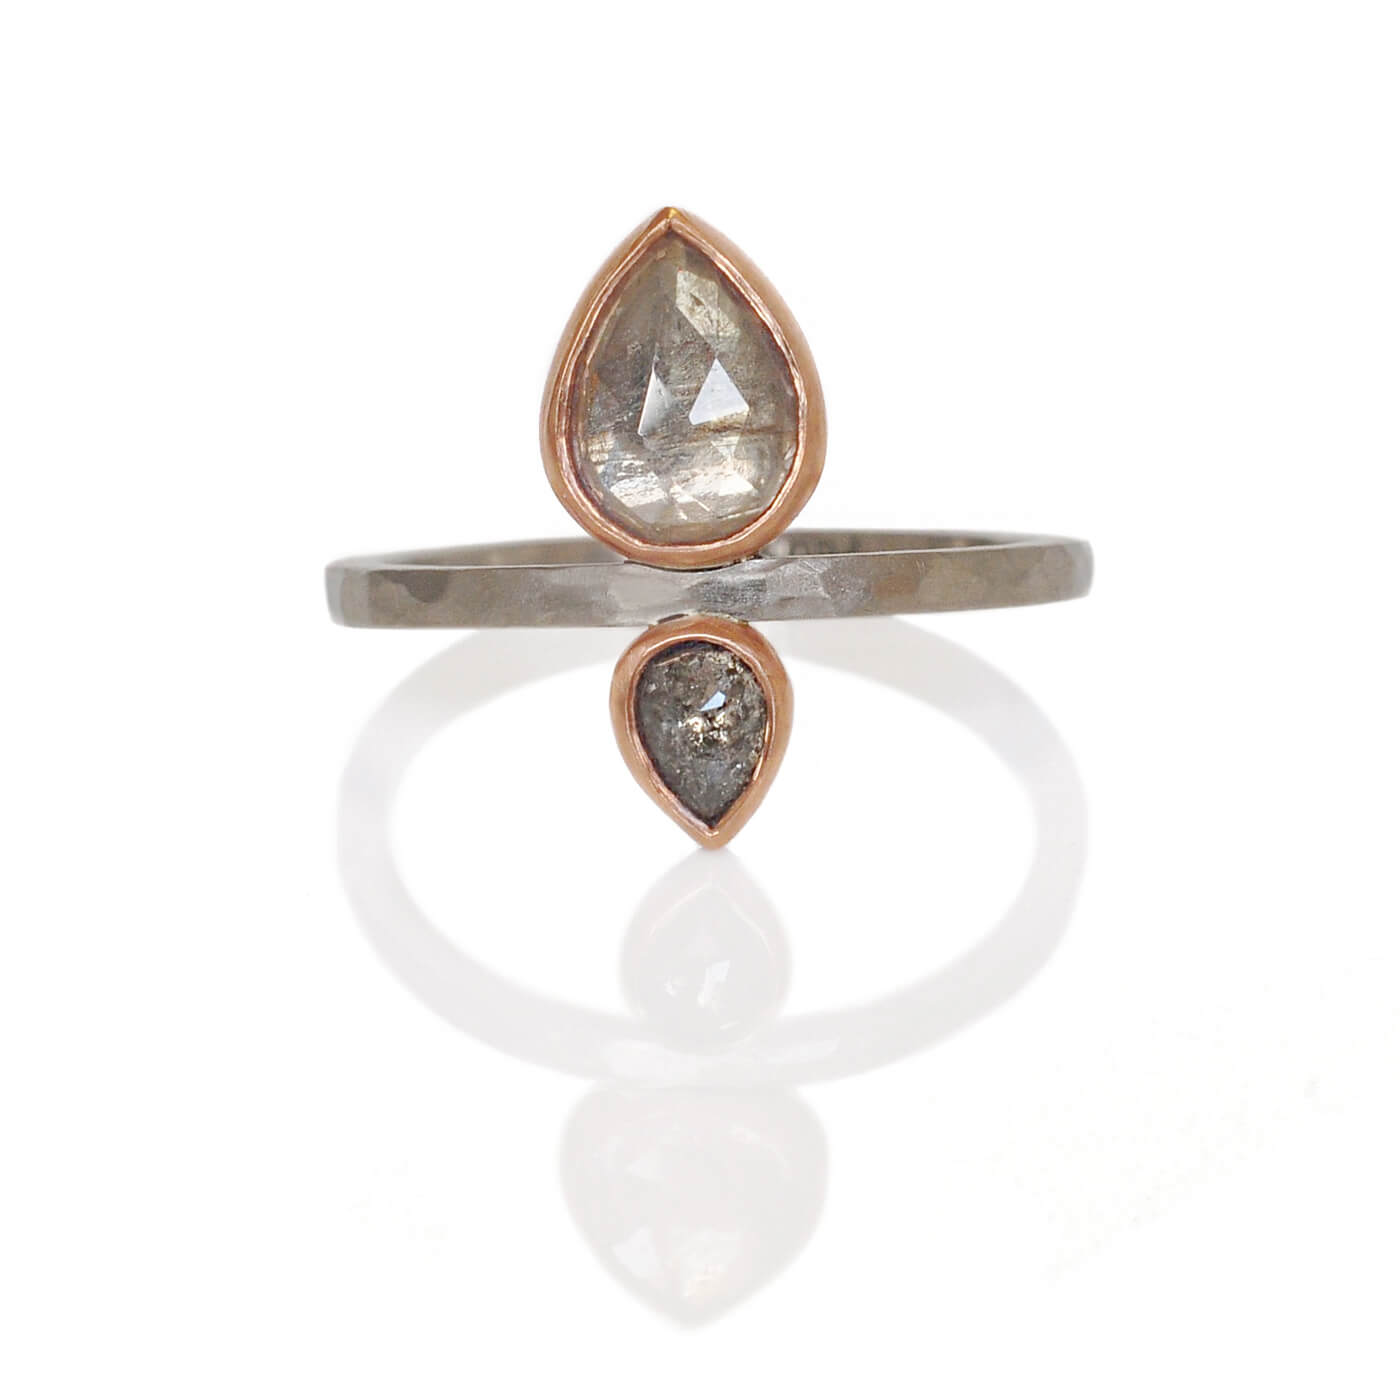 Soft gray sapphire and ice gray diamond set in red gold on a hammered palladium band. Handmade by EC Design Studio in Minneapolis, MN using recycled metal and conflict-free stones.